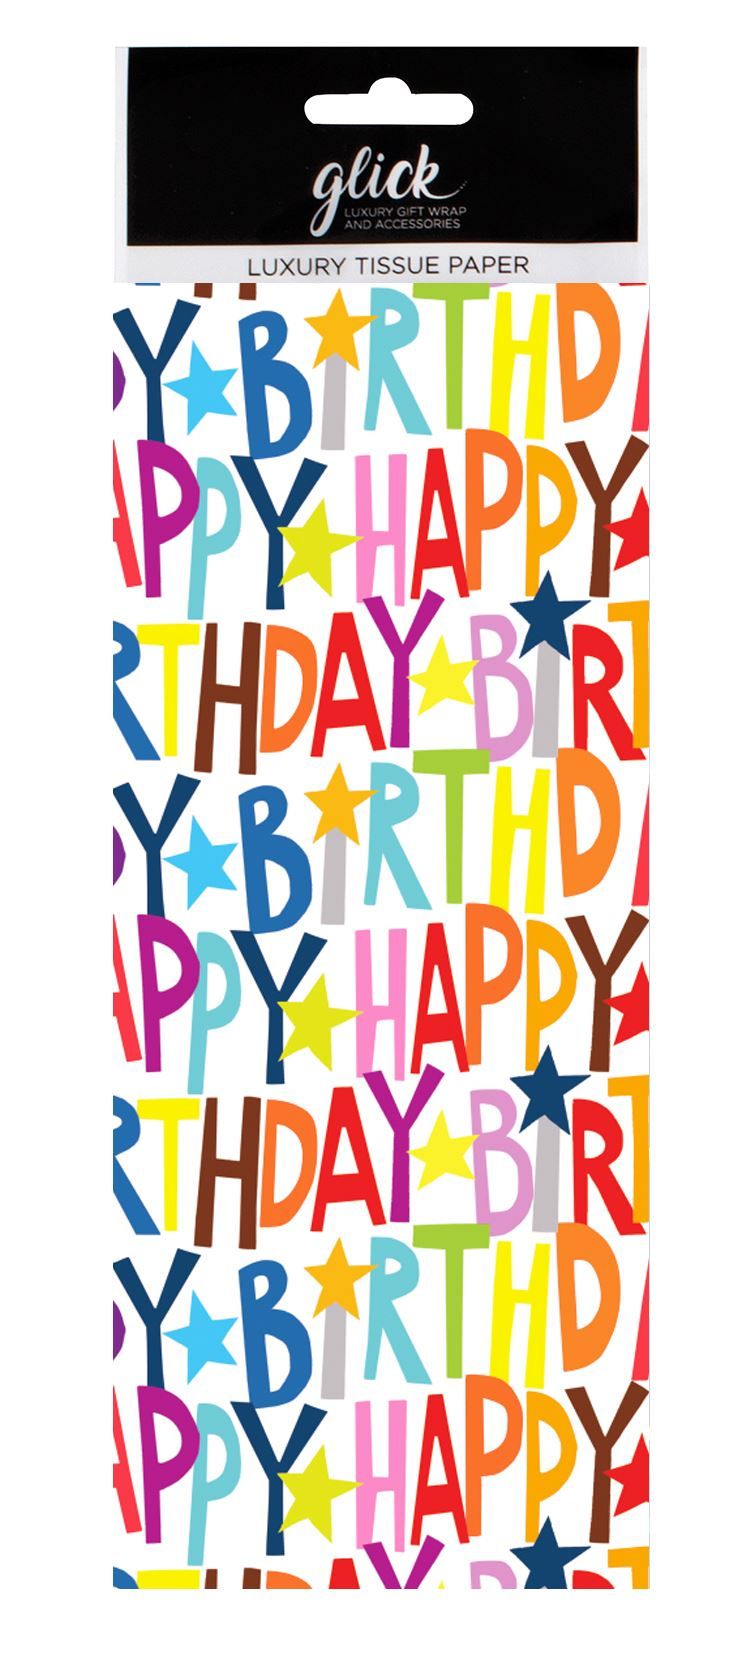 Happy Birthday Luxury Tissue Paper - Pack Of 4 LARGE Sheets - Luxury TISSUE